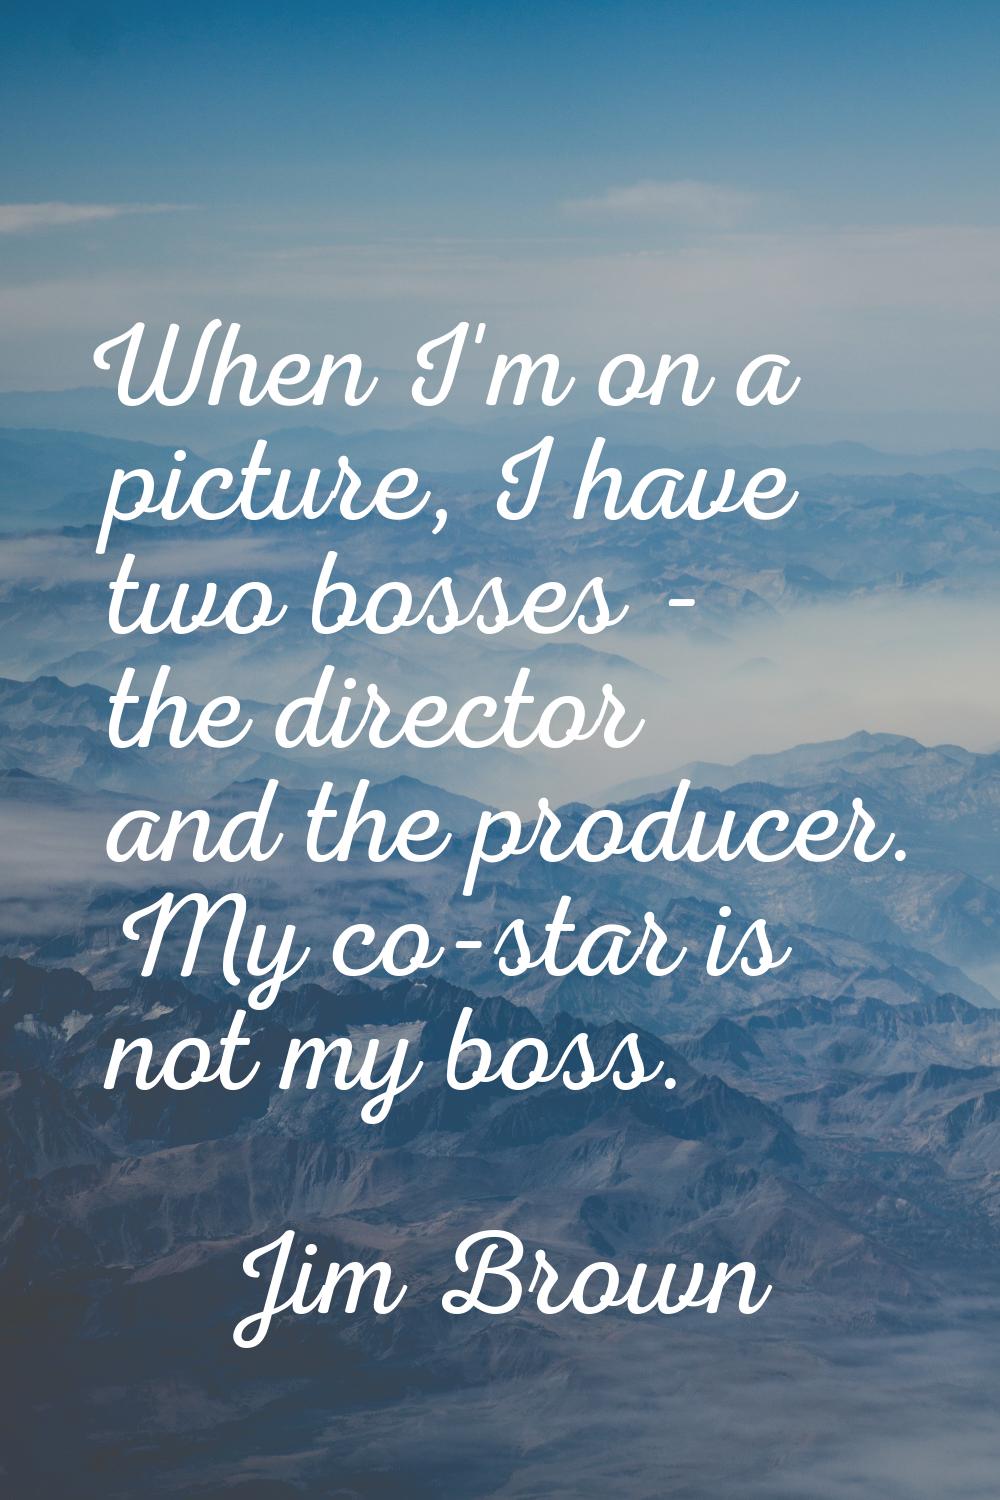 When I'm on a picture, I have two bosses - the director and the producer. My co-star is not my boss